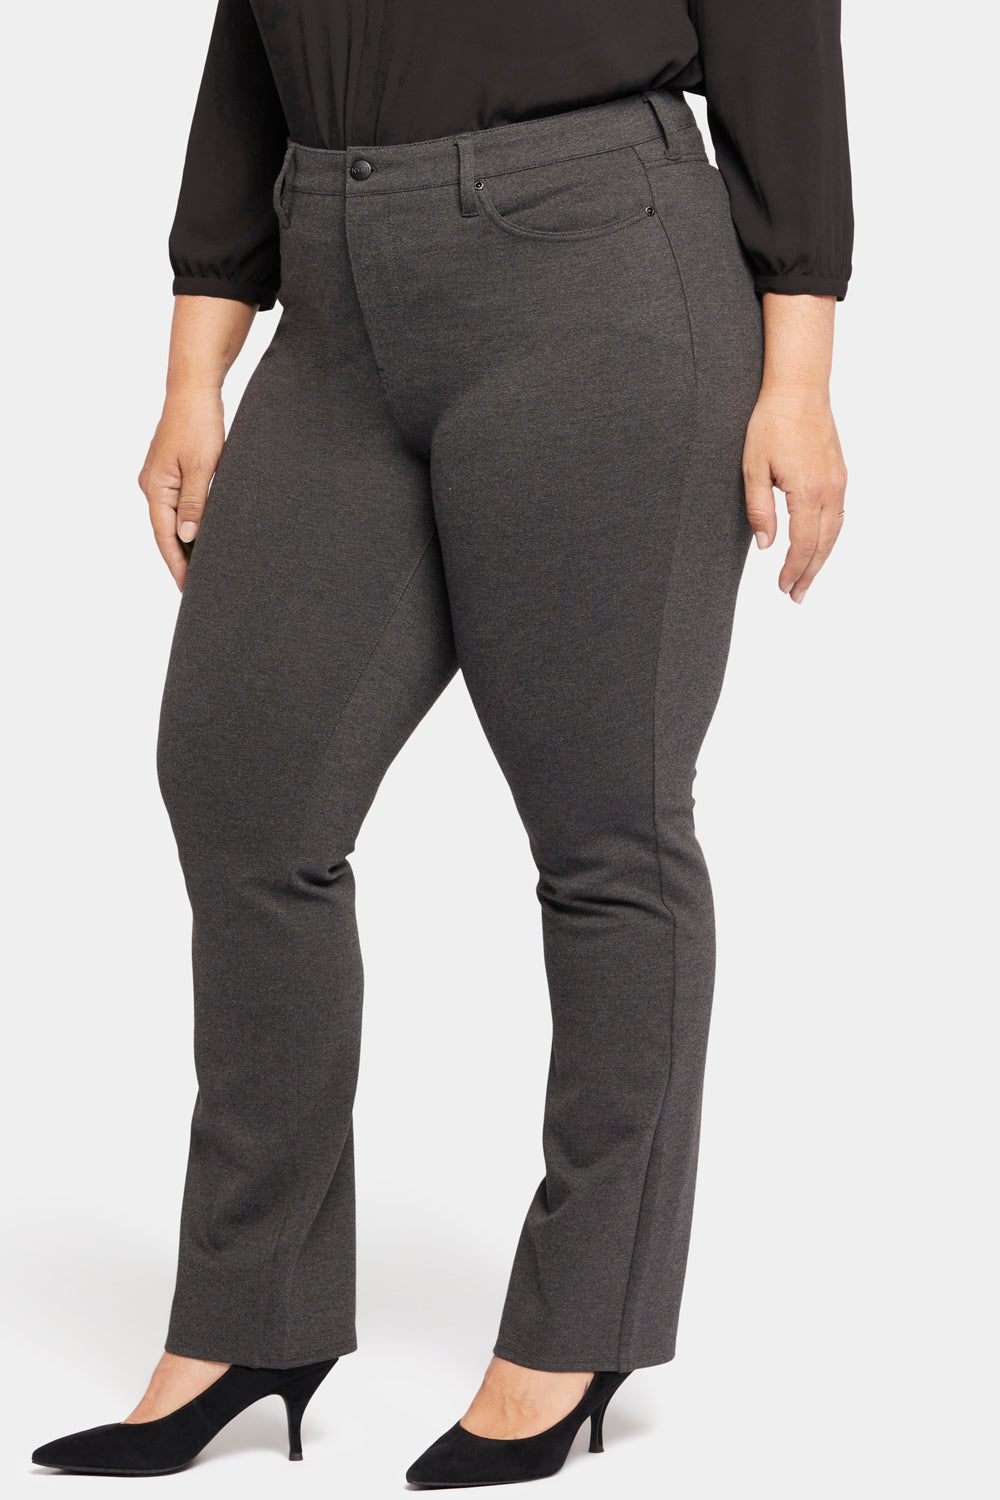 Classic Trouser Pants In Petite Sculpt-Her™ Collection - Charcoal Heathered  Grey